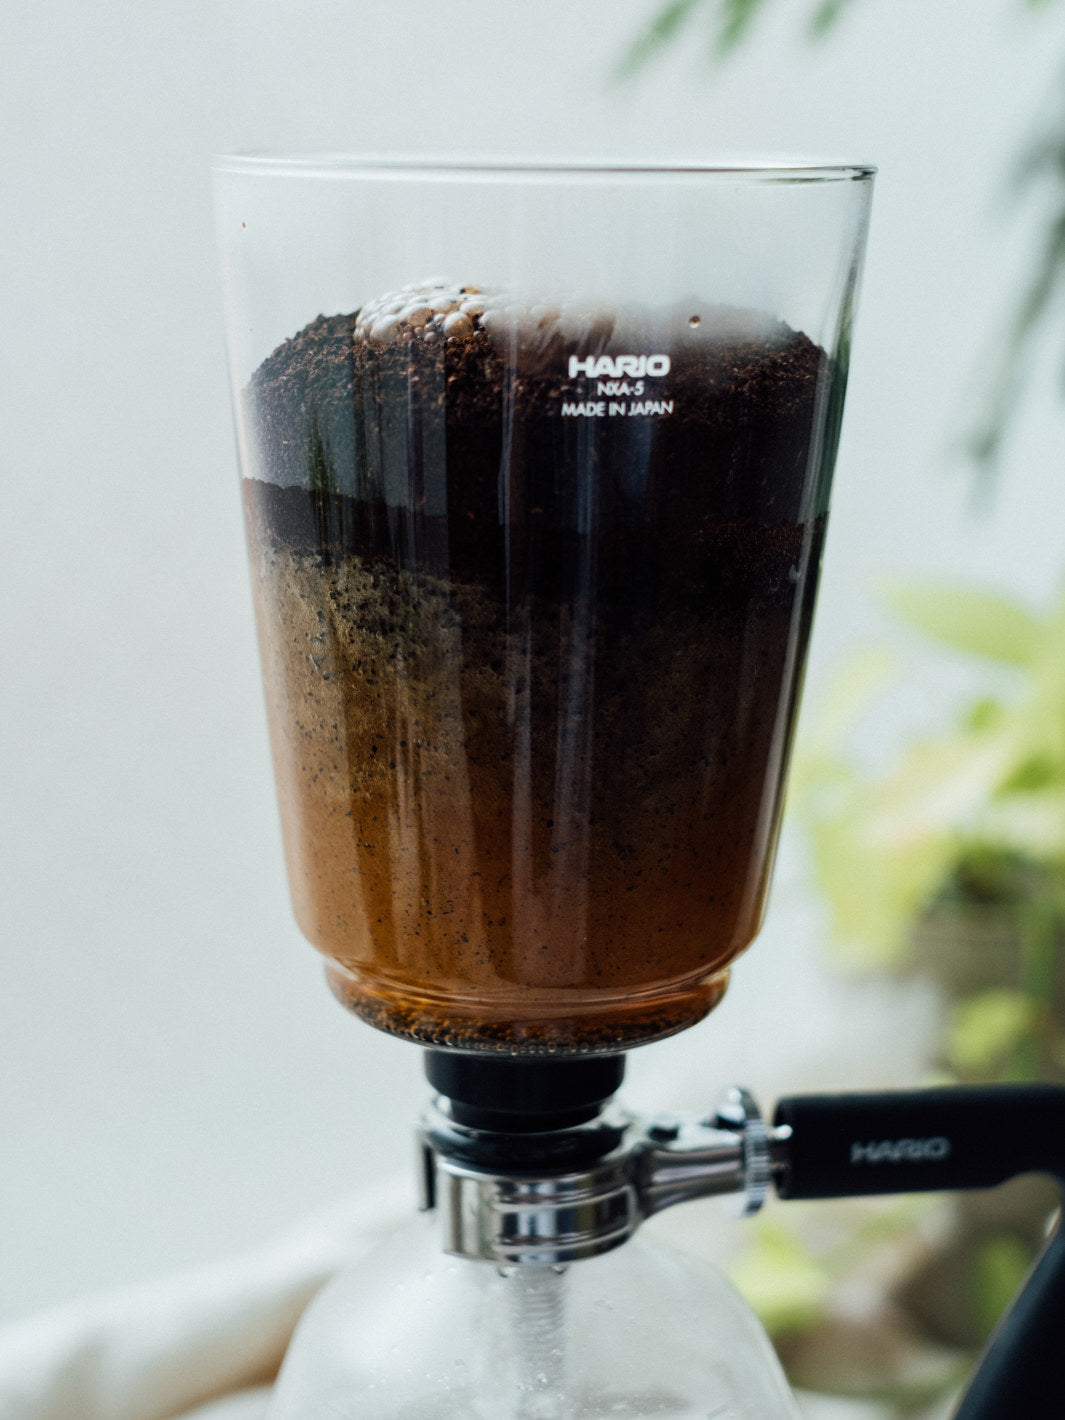 HARIO NEXT Syphon / Syphon Brewers | Eight Ounce Coffee